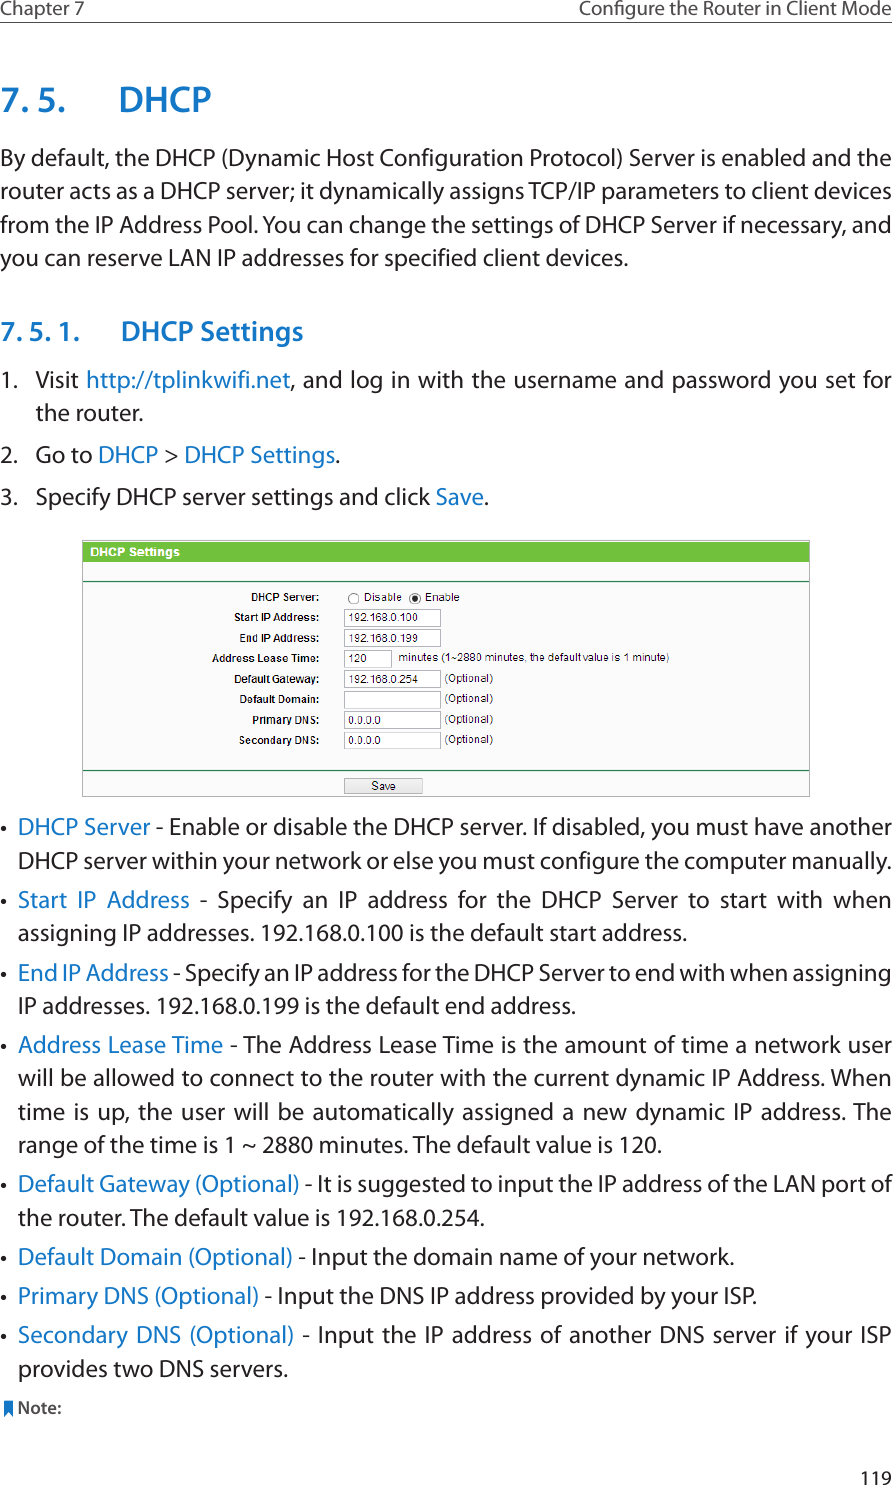 119Chapter 7 Congure the Router in Client Mode7. 5.  DHCPBy default, the DHCP (Dynamic Host Configuration Protocol) Server is enabled and the router acts as a DHCP server; it dynamically assigns TCP/IP parameters to client devices from the IP Address Pool. You can change the settings of DHCP Server if necessary, and you can reserve LAN IP addresses for specified client devices.7. 5. 1.  DHCP Settings1.  Visit http://tplinkwifi.net, and log in with the username and password you set for the router.2.  Go to DHCP &gt; DHCP Settings. 3.  Specify DHCP server settings and click Save.•  DHCP Server - Enable or disable the DHCP server. If disabled, you must have another DHCP server within your network or else you must configure the computer manually.•  Start IP Address - Specify an IP address for the DHCP Server to start with when assigning IP addresses. 192.168.0.100 is the default start address.•  End IP Address - Specify an IP address for the DHCP Server to end with when assigning IP addresses. 192.168.0.199 is the default end address.•  Address Lease Time - The Address Lease Time is the amount of time a network user will be allowed to connect to the router with the current dynamic IP Address. When time is up, the user will be automatically assigned a new dynamic IP address. The range of the time is 1 ~ 2880 minutes. The default value is 120.•  Default Gateway (Optional) - It is suggested to input the IP address of the LAN port of the router. The default value is 192.168.0.254.•  Default Domain (Optional) - Input the domain name of your network.•  Primary DNS (Optional) - Input the DNS IP address provided by your ISP.•  Secondary DNS (Optional) - Input the IP address of another DNS server if your ISP provides two DNS servers. Note: